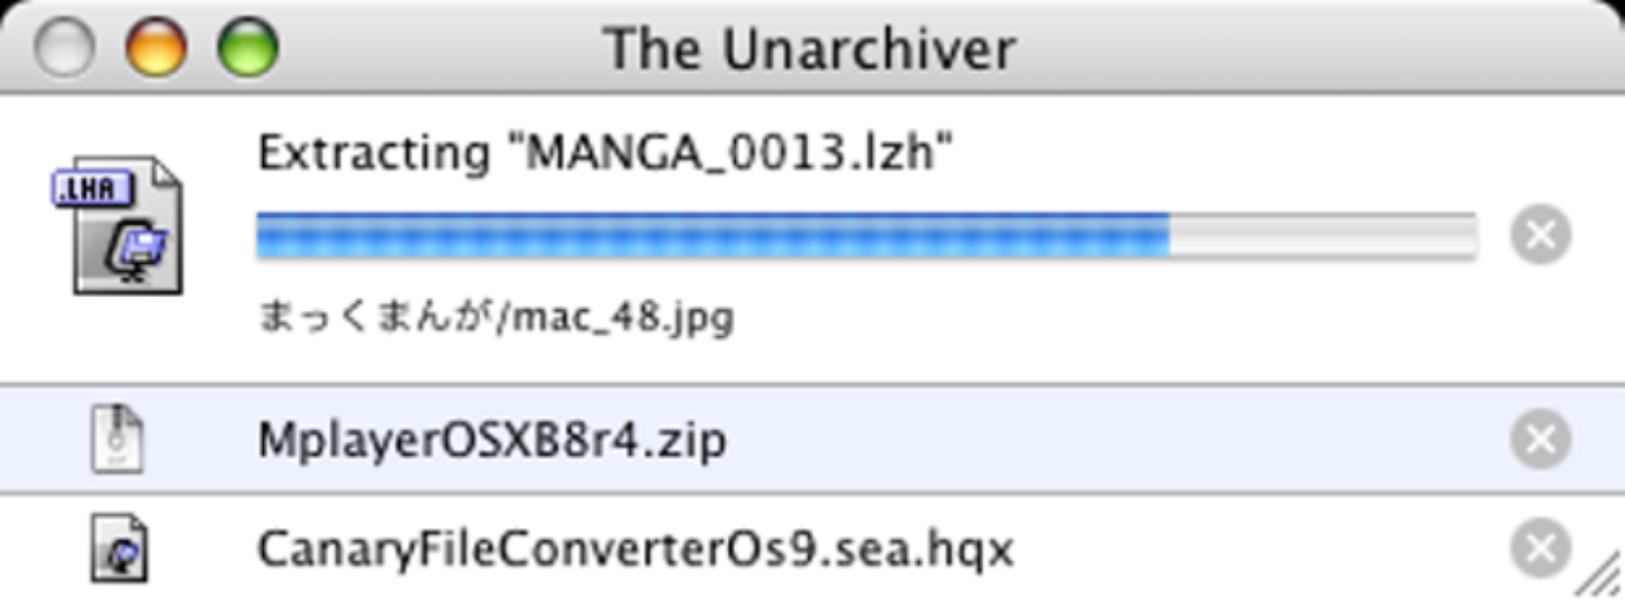 the unarchiver app